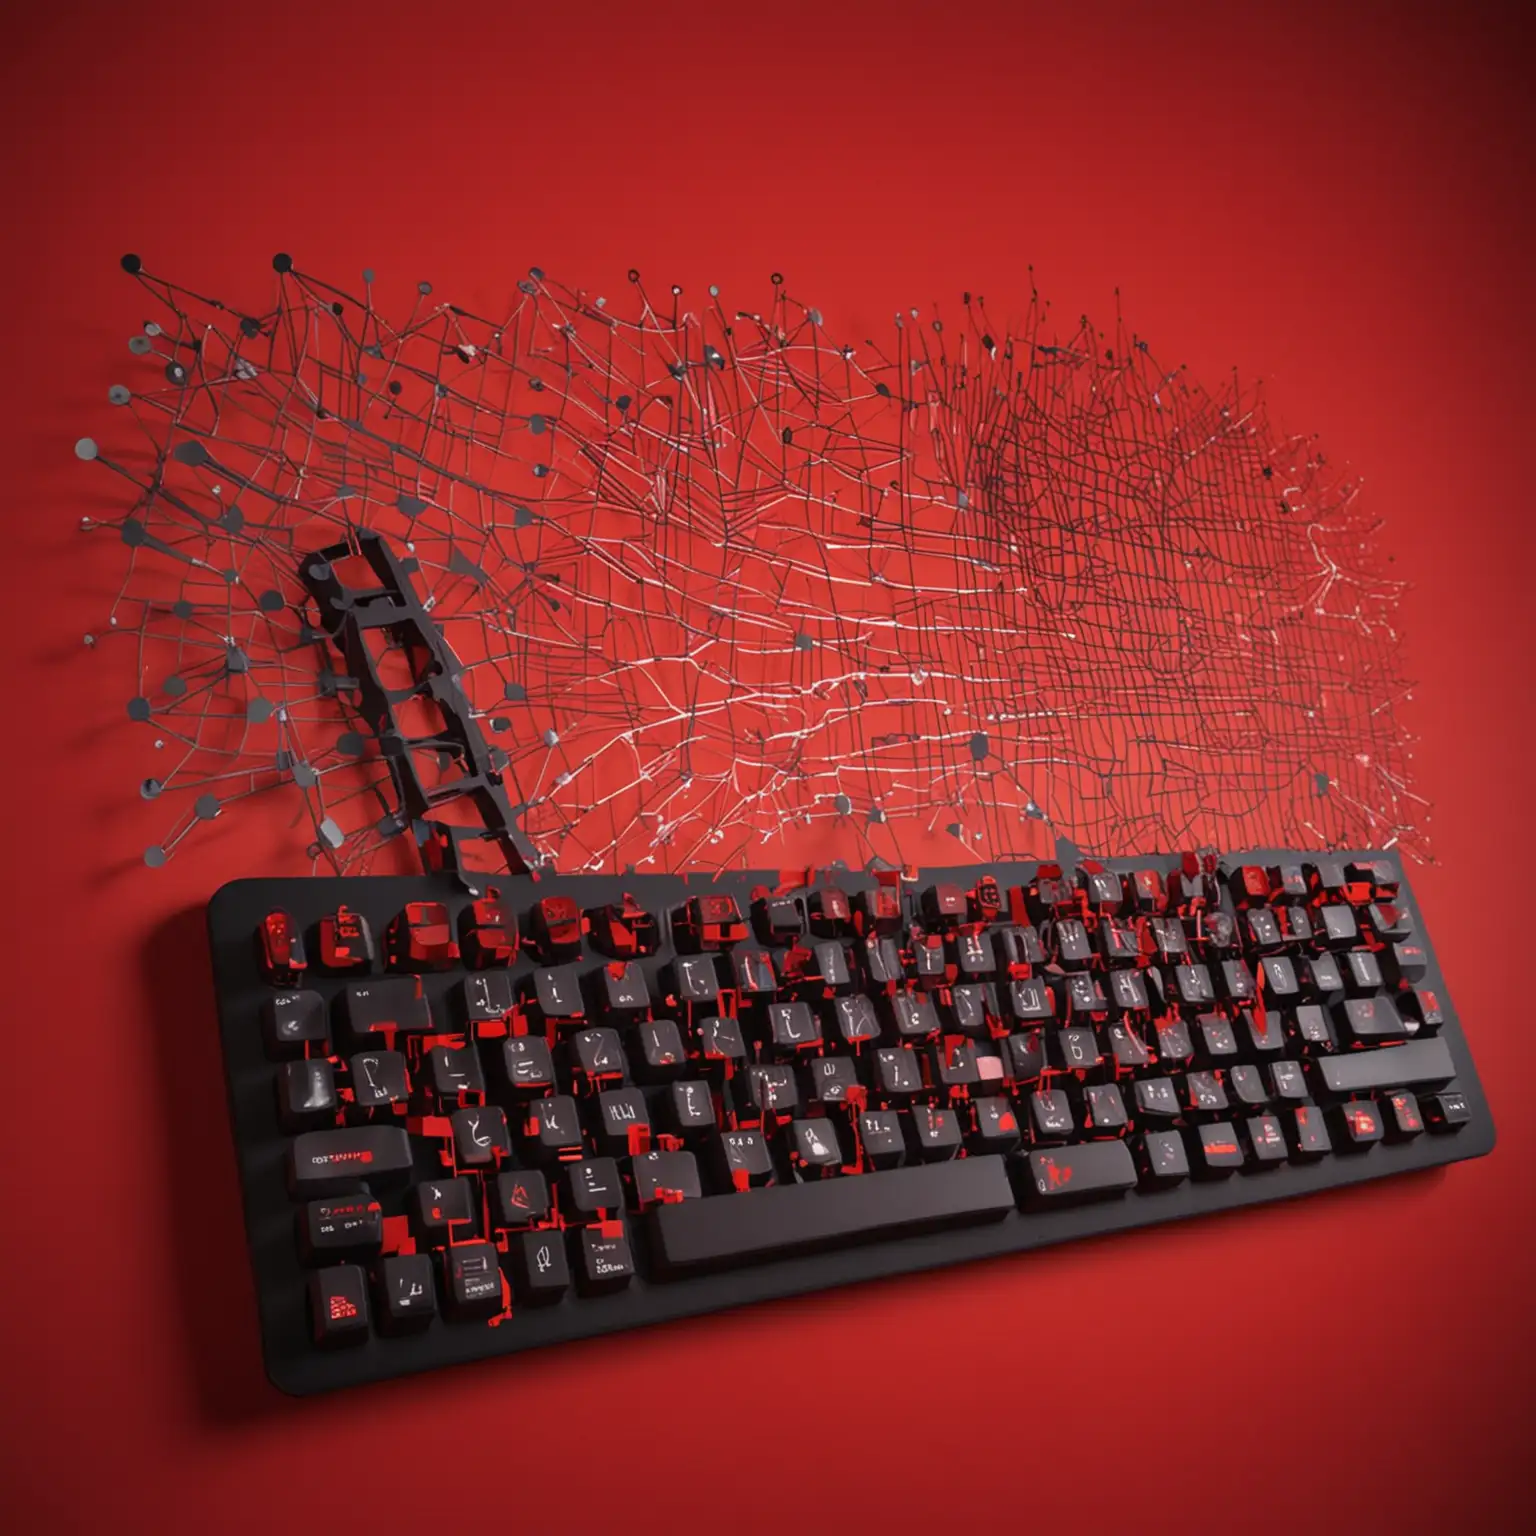 Silhouette of World Wide Web Icon on Abstract Red Technological Background with Keyboard